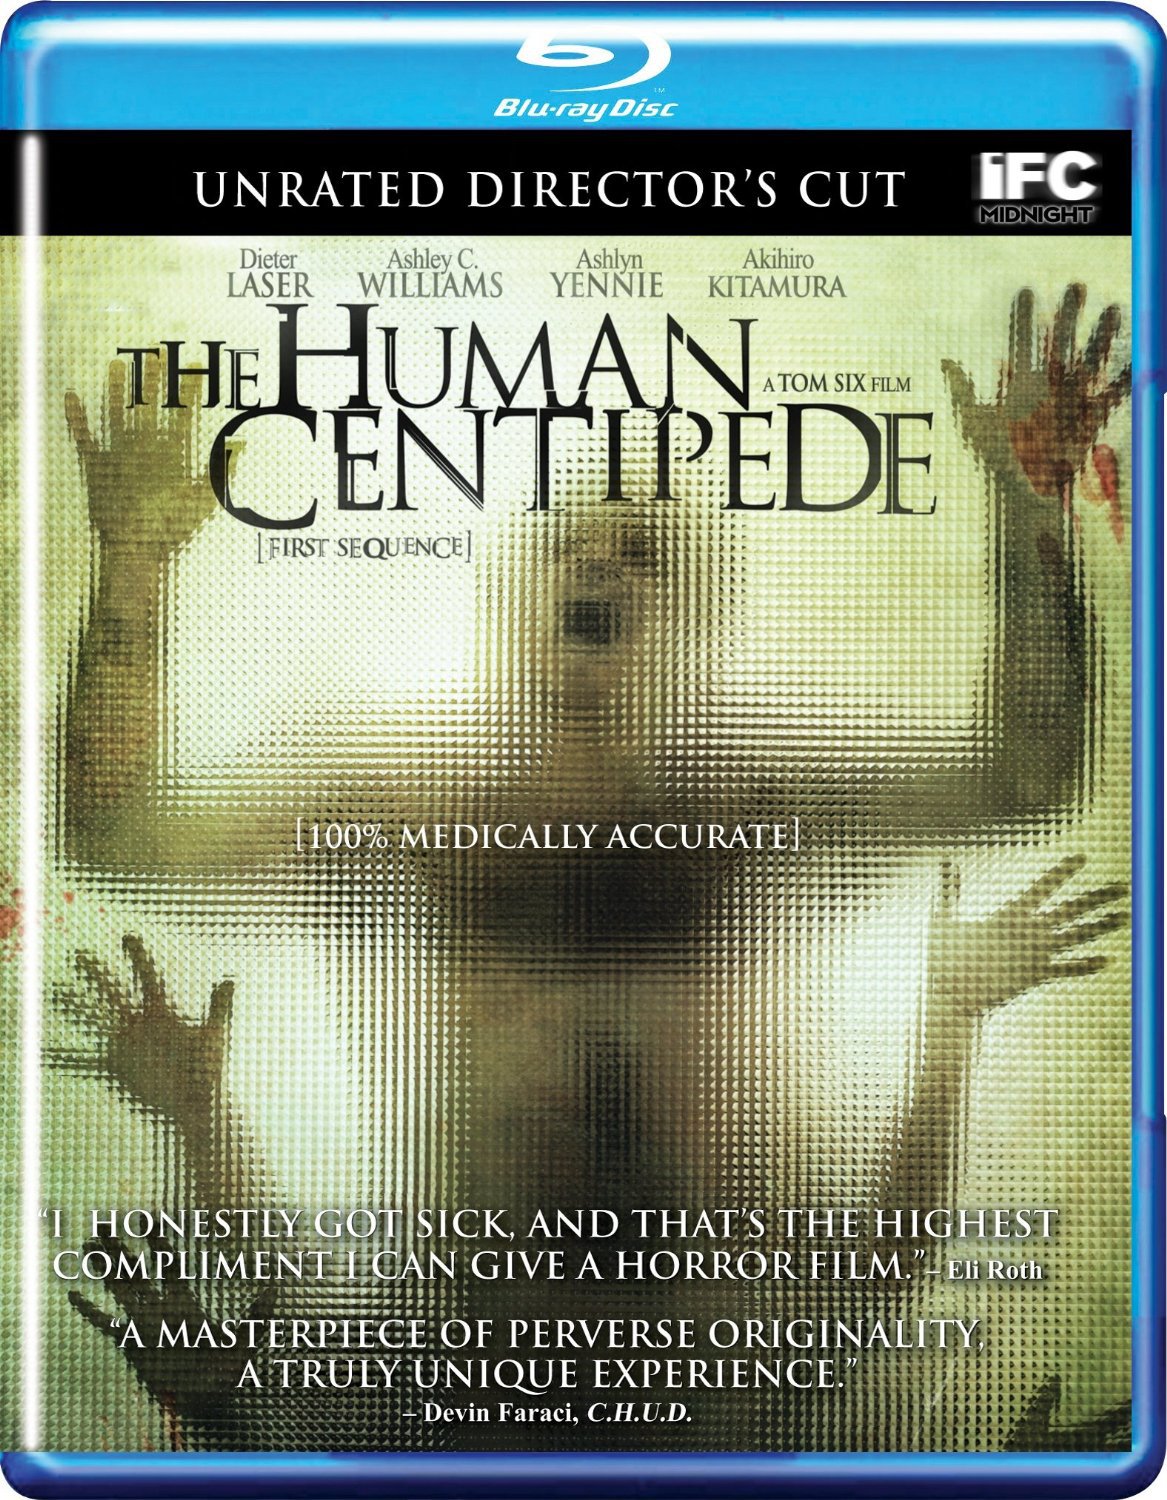 Human Centipede, The